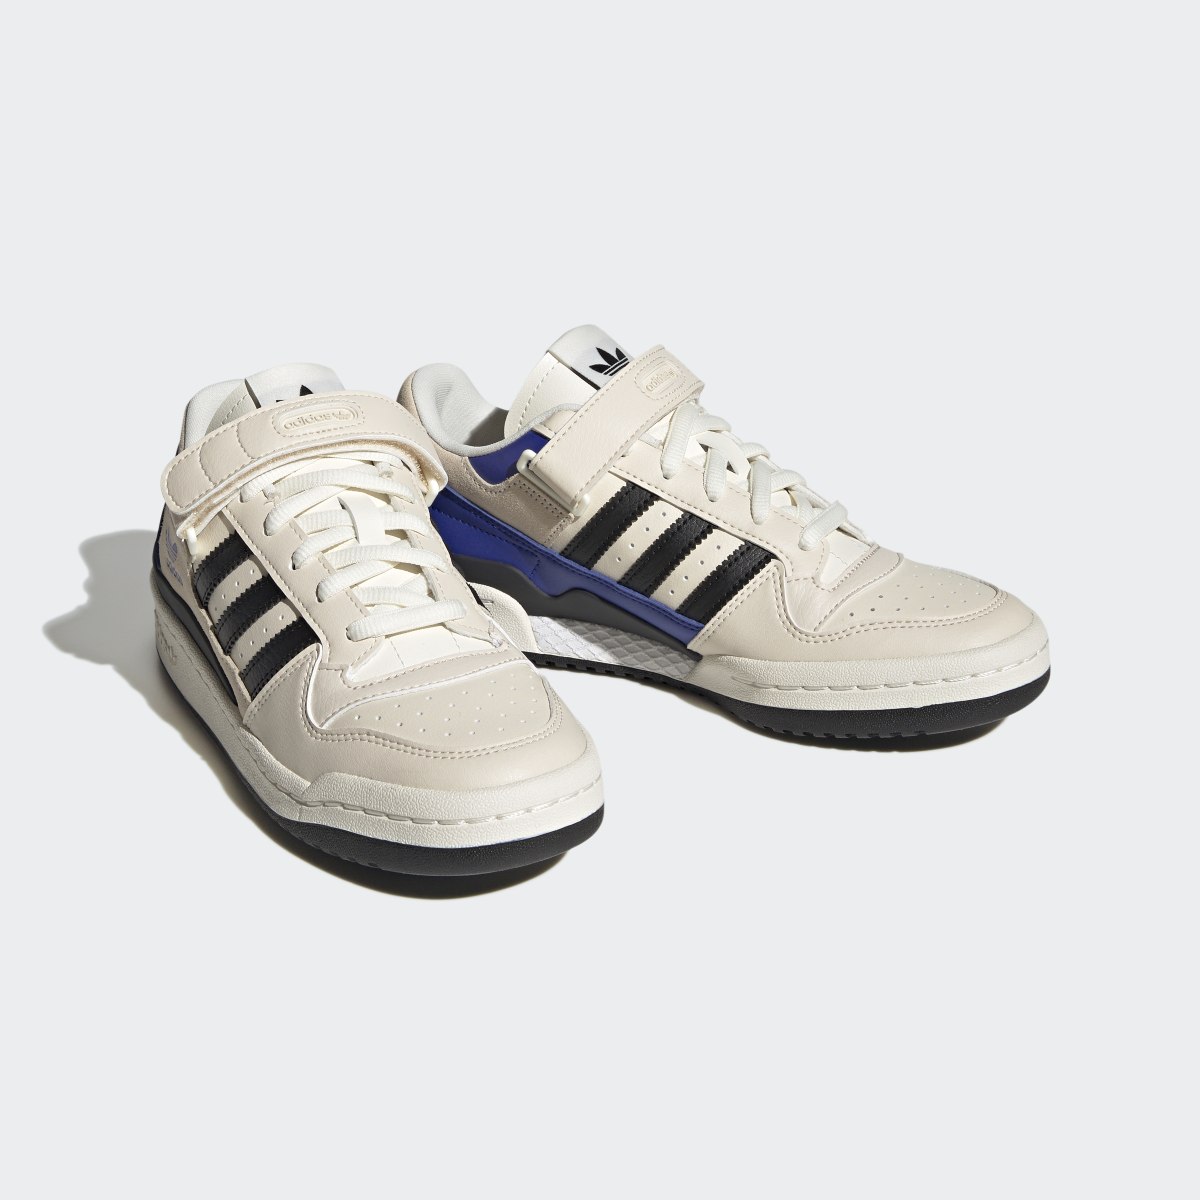 Adidas Forum Low Shoes. 5